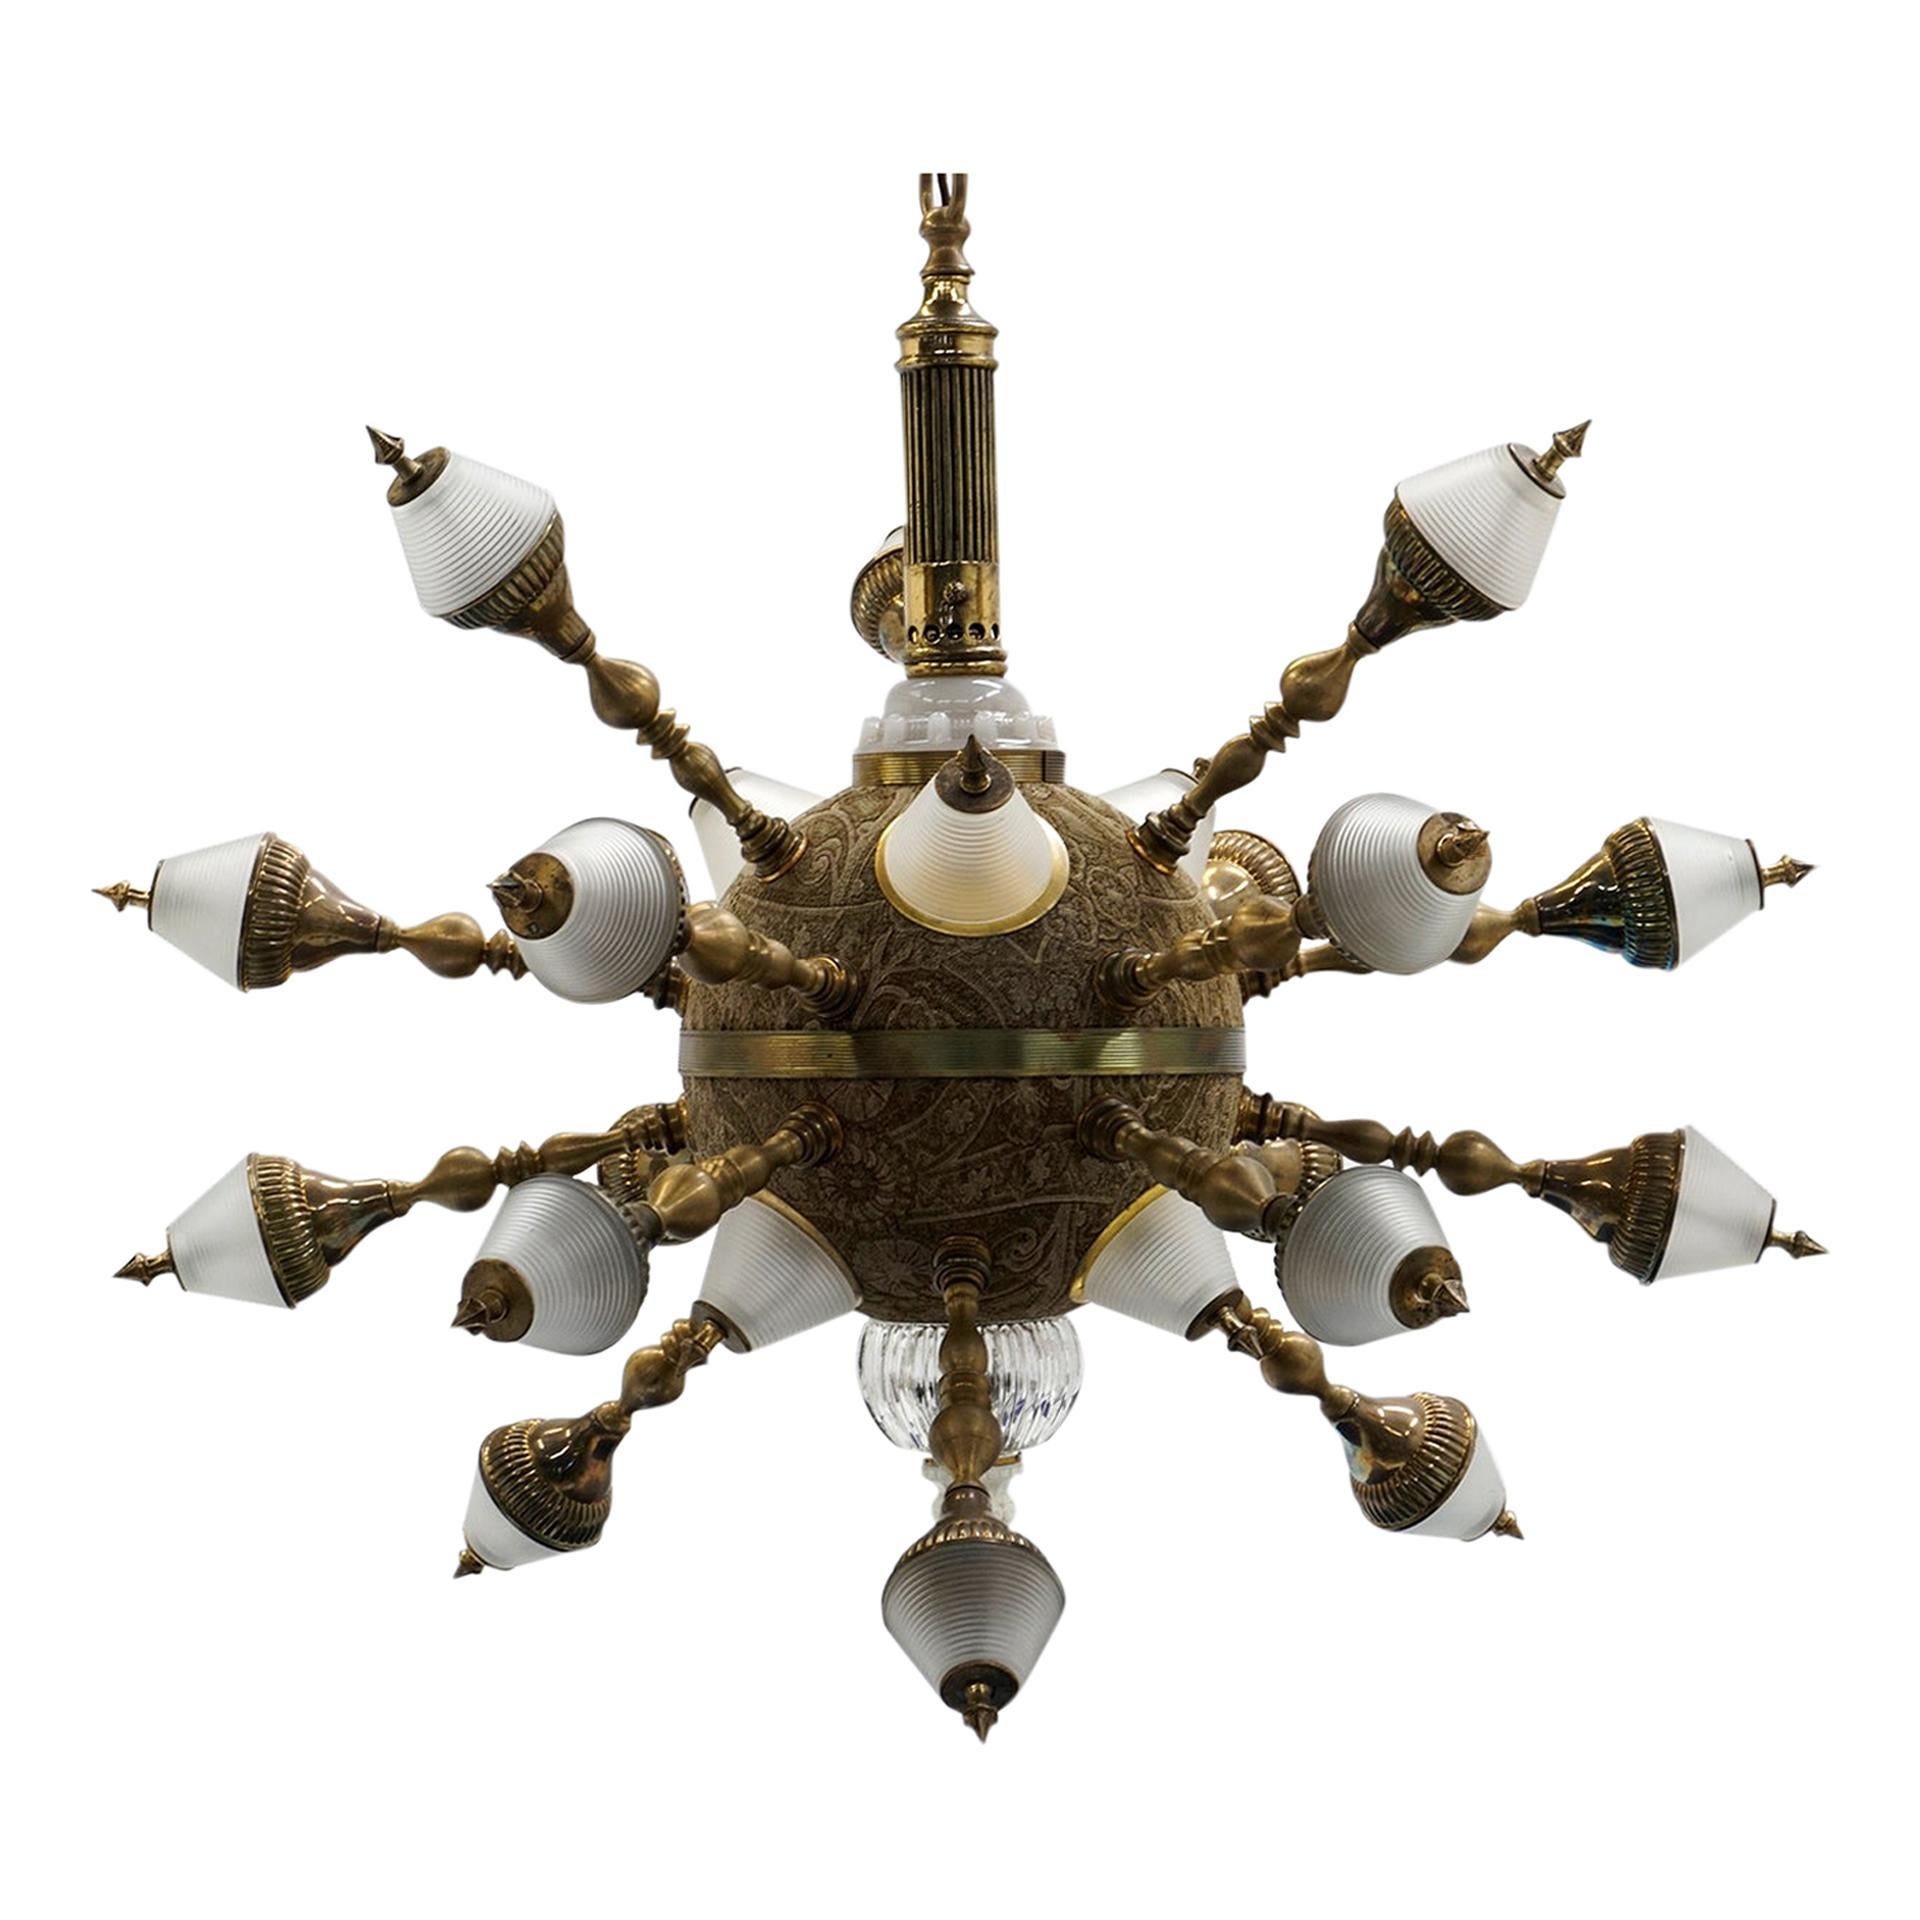 One Off Kind Brass and Glass Chandelier, 18 Sputnik Style Arms, 25 Lights Total